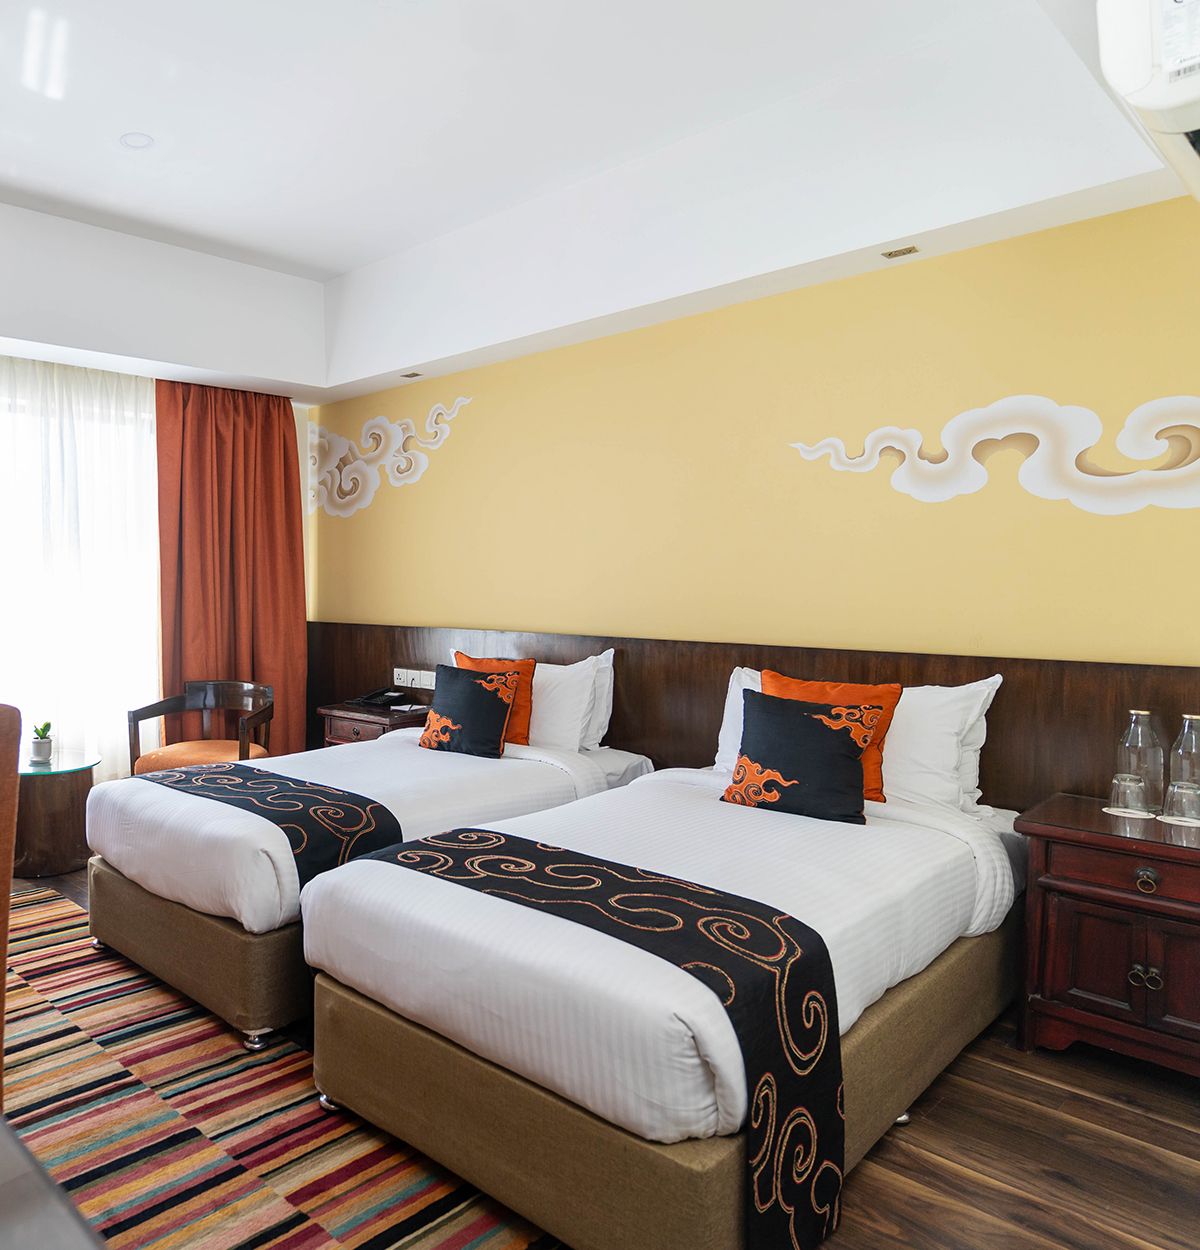 Deluxe room at the boutique hotel in Kathmandu